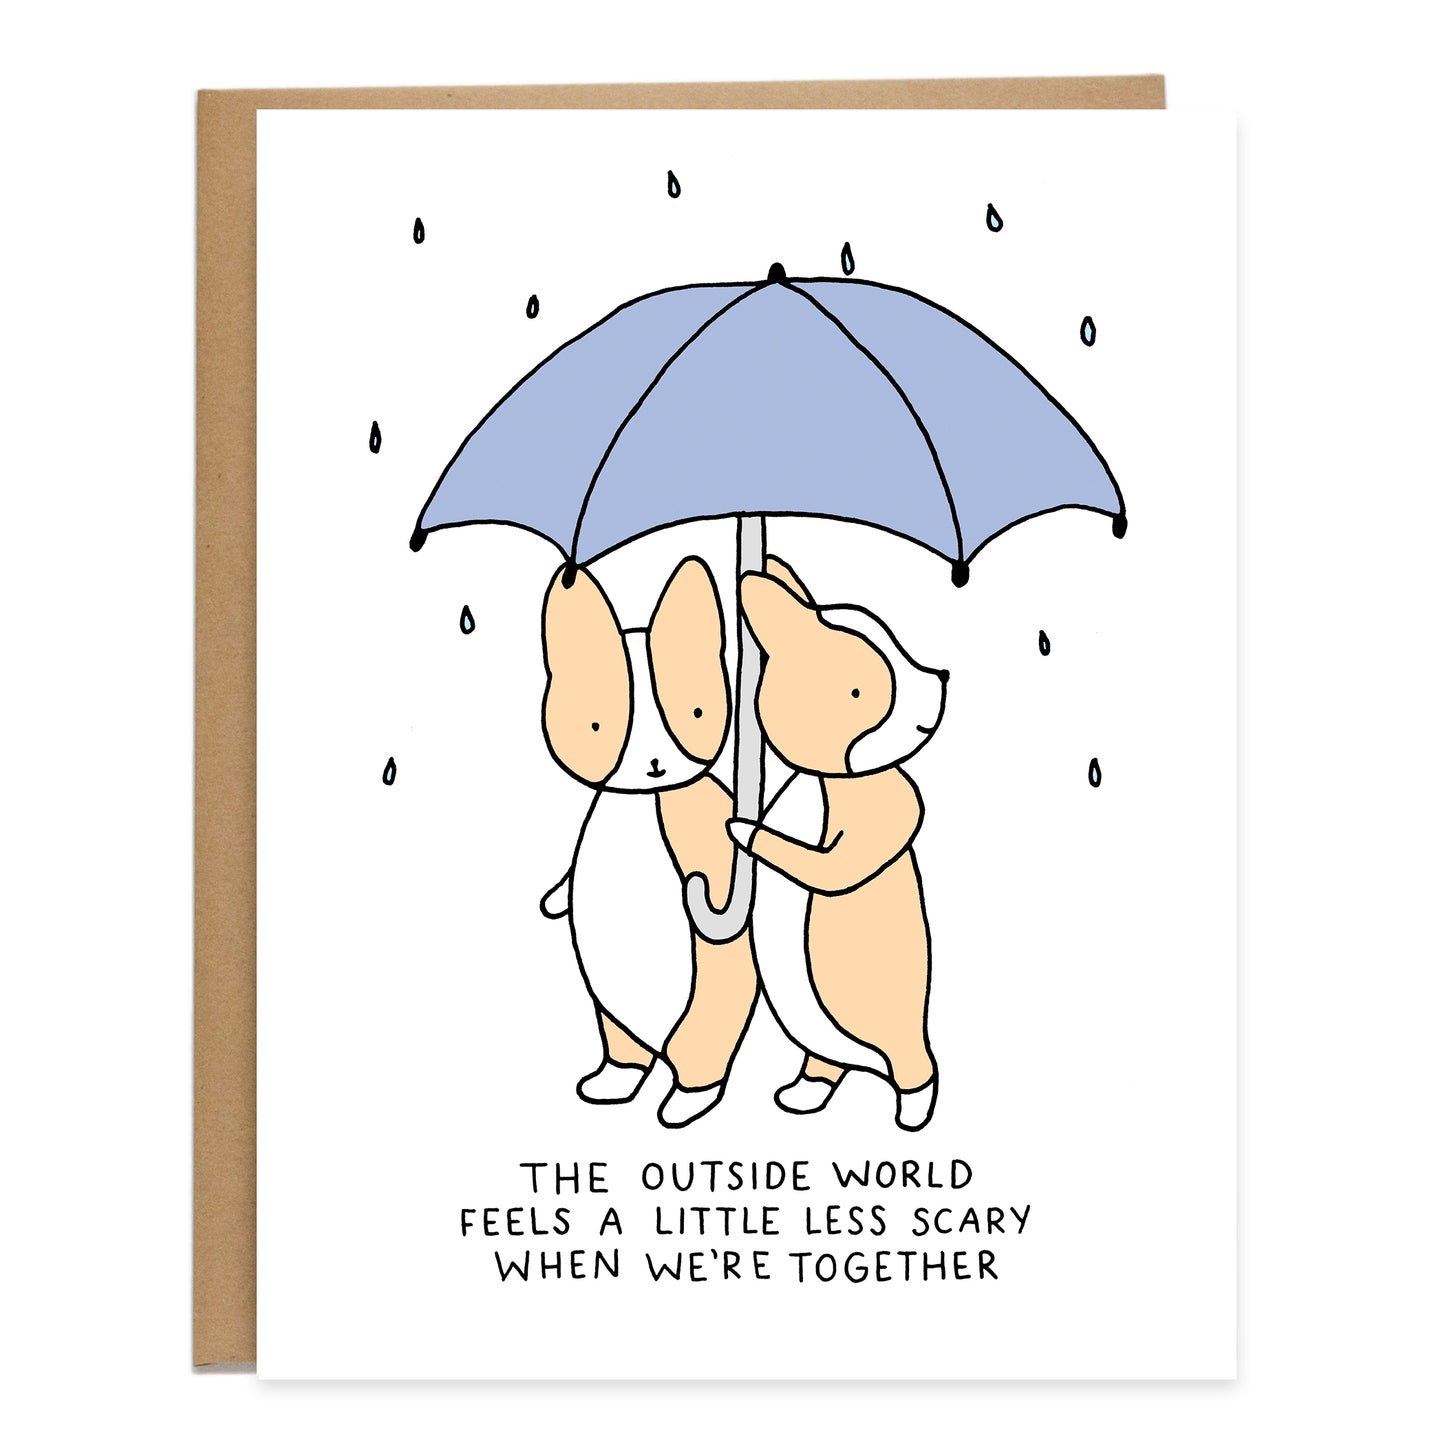 two corgis under a cornflower blue umbrella while it's raining and smiling, text on card reads: the outside world feels a little less scary when we're together